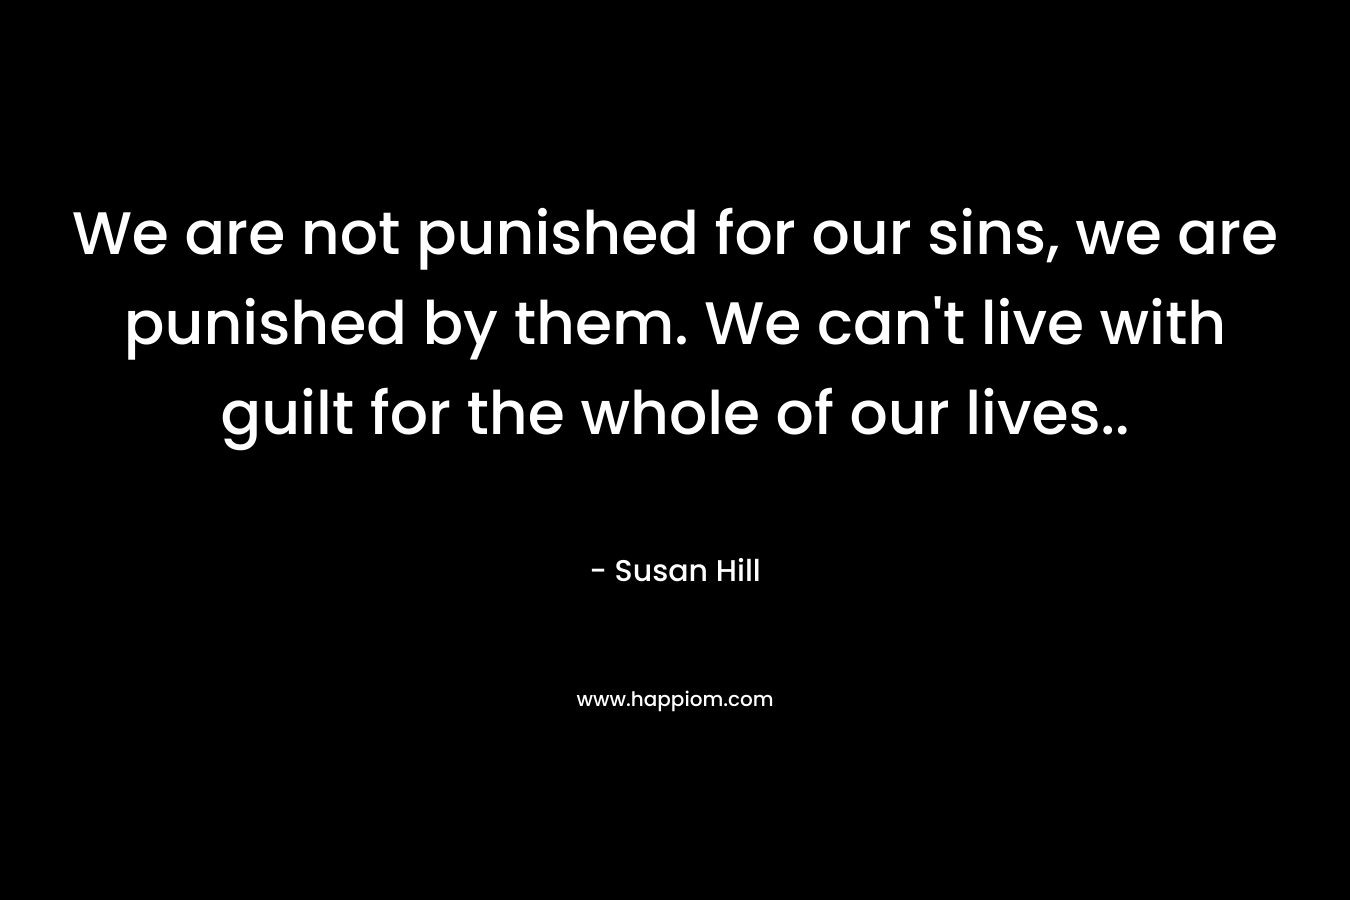 We are not punished for our sins, we are punished by them. We can't live with guilt for the whole of our lives..